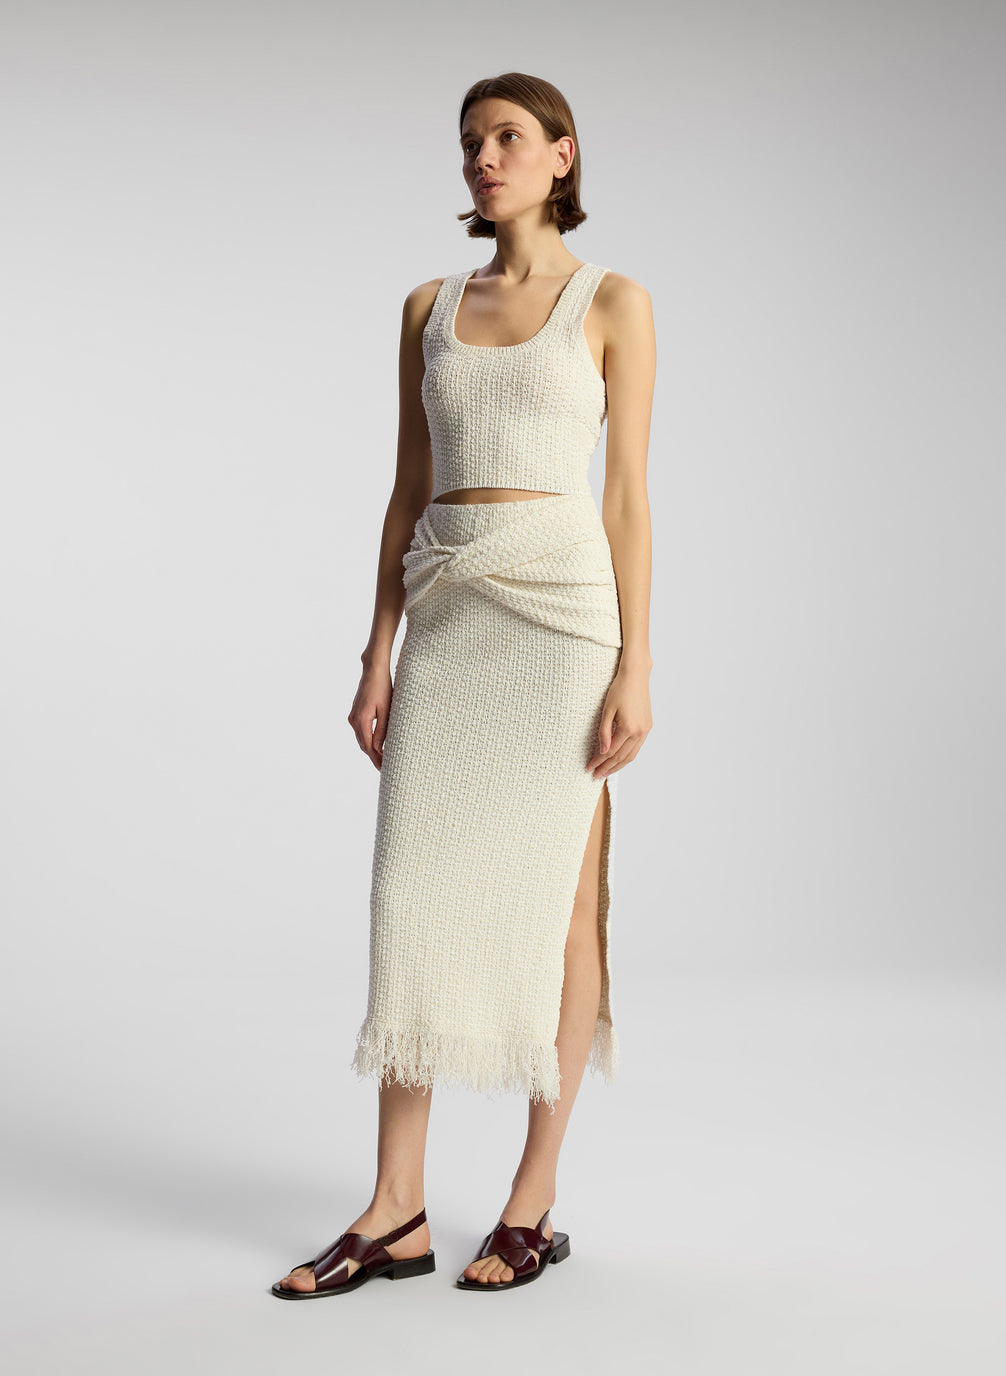 side view of woman wearing white knit sleeveless top and matching skirt